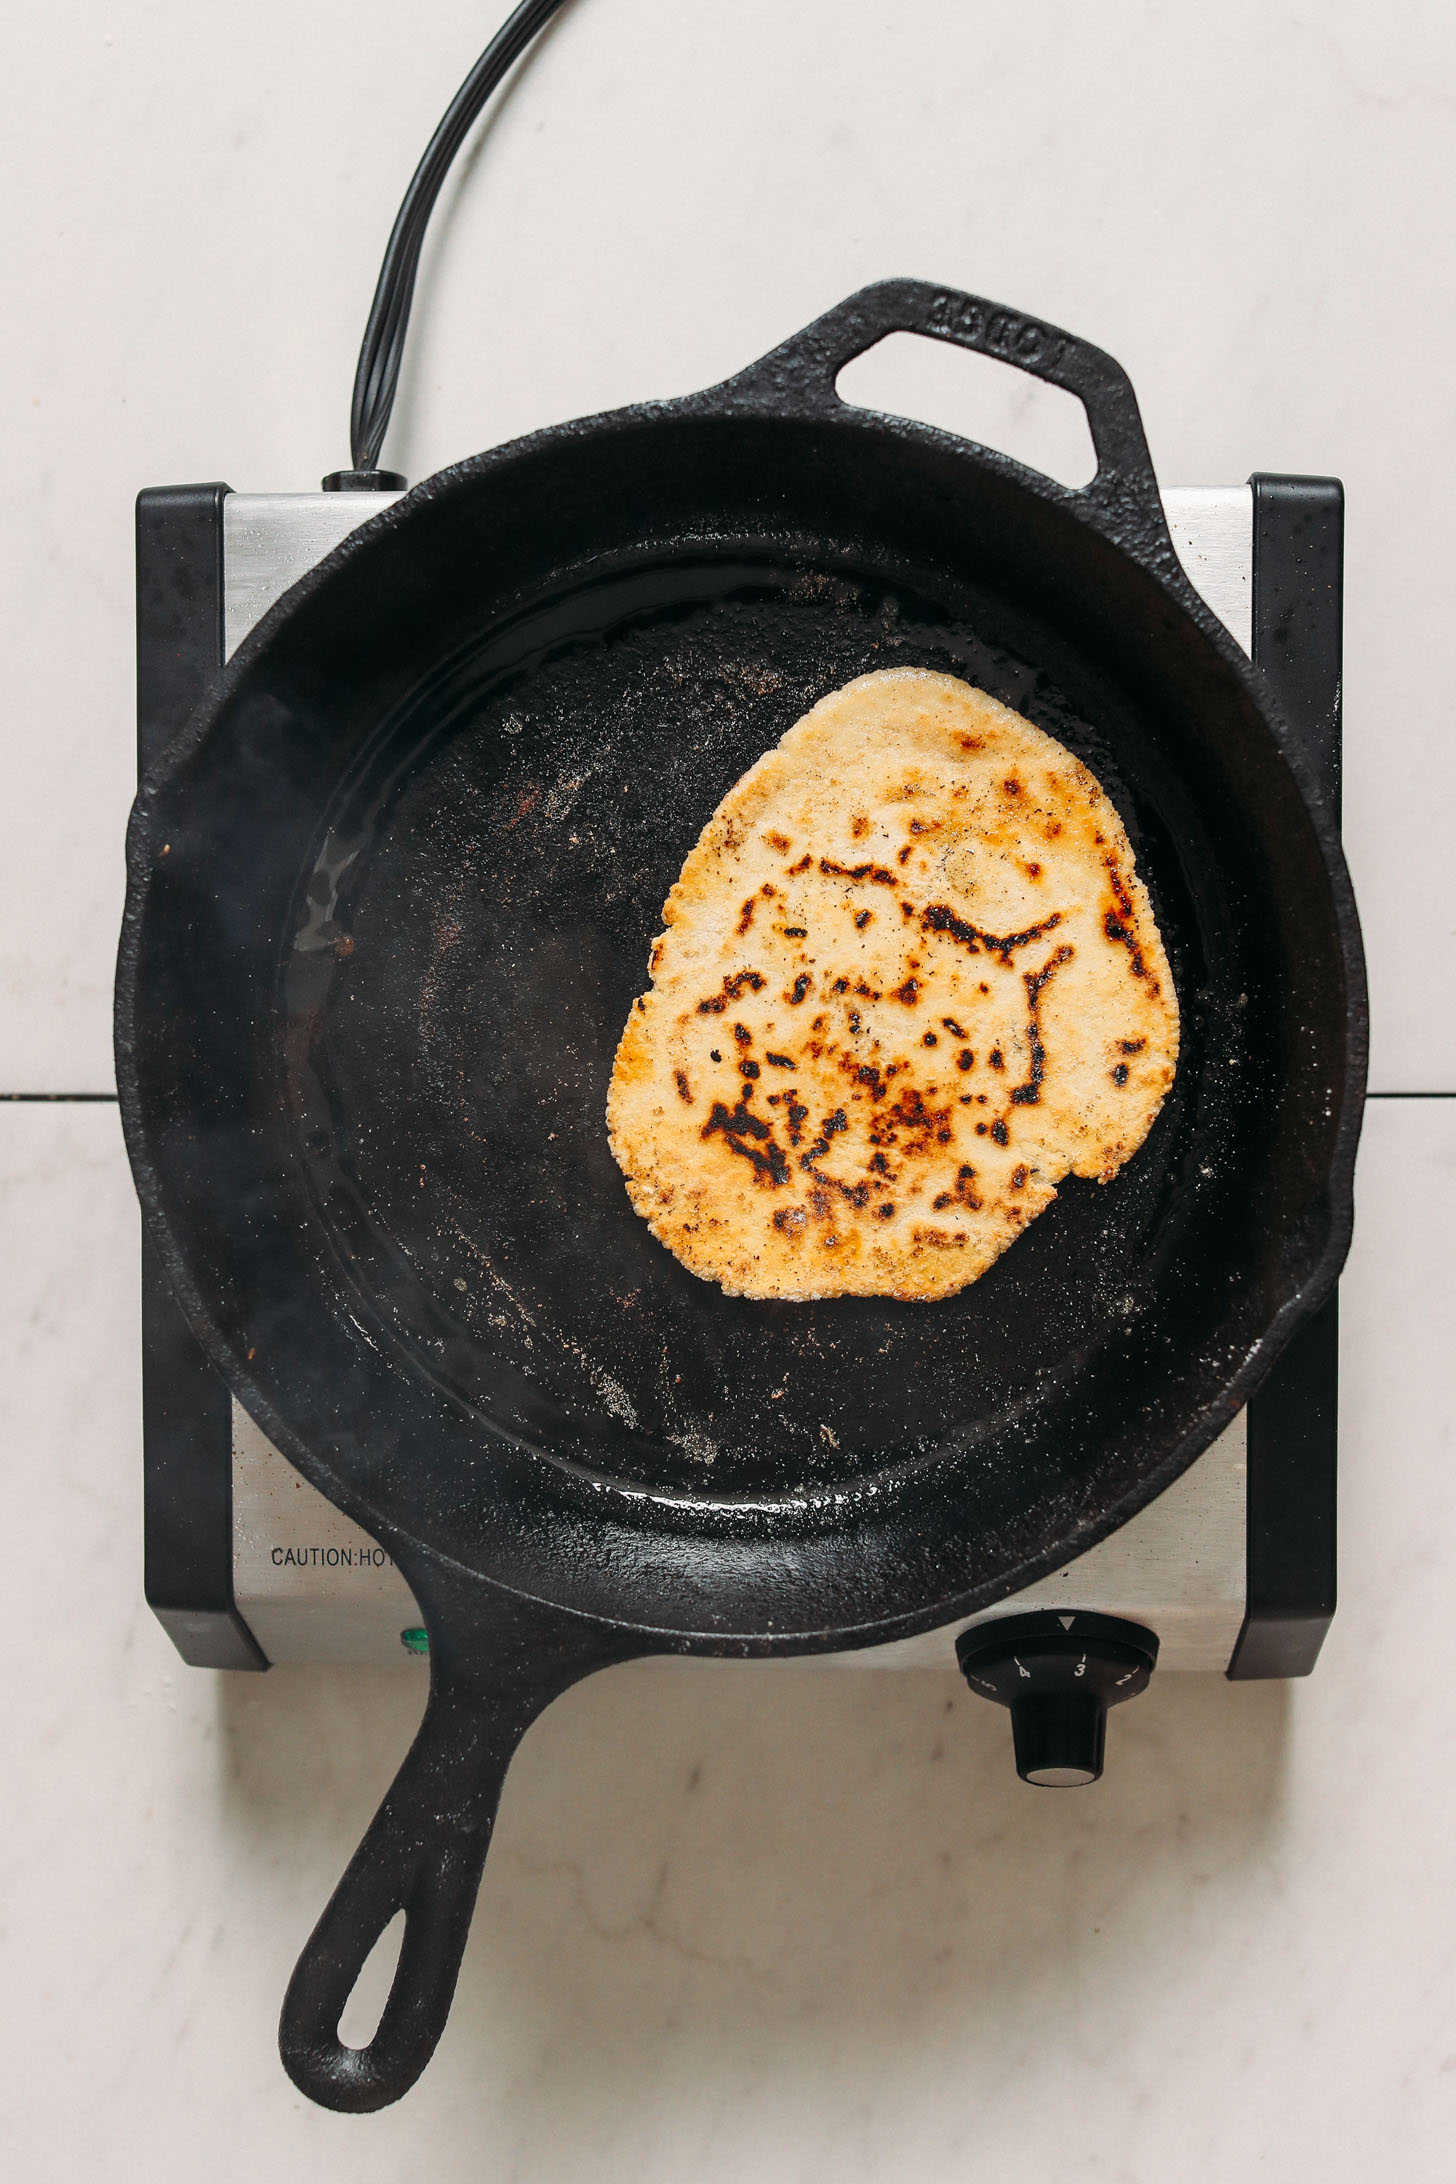 Cooking gluten free naan in a cast iron skillet